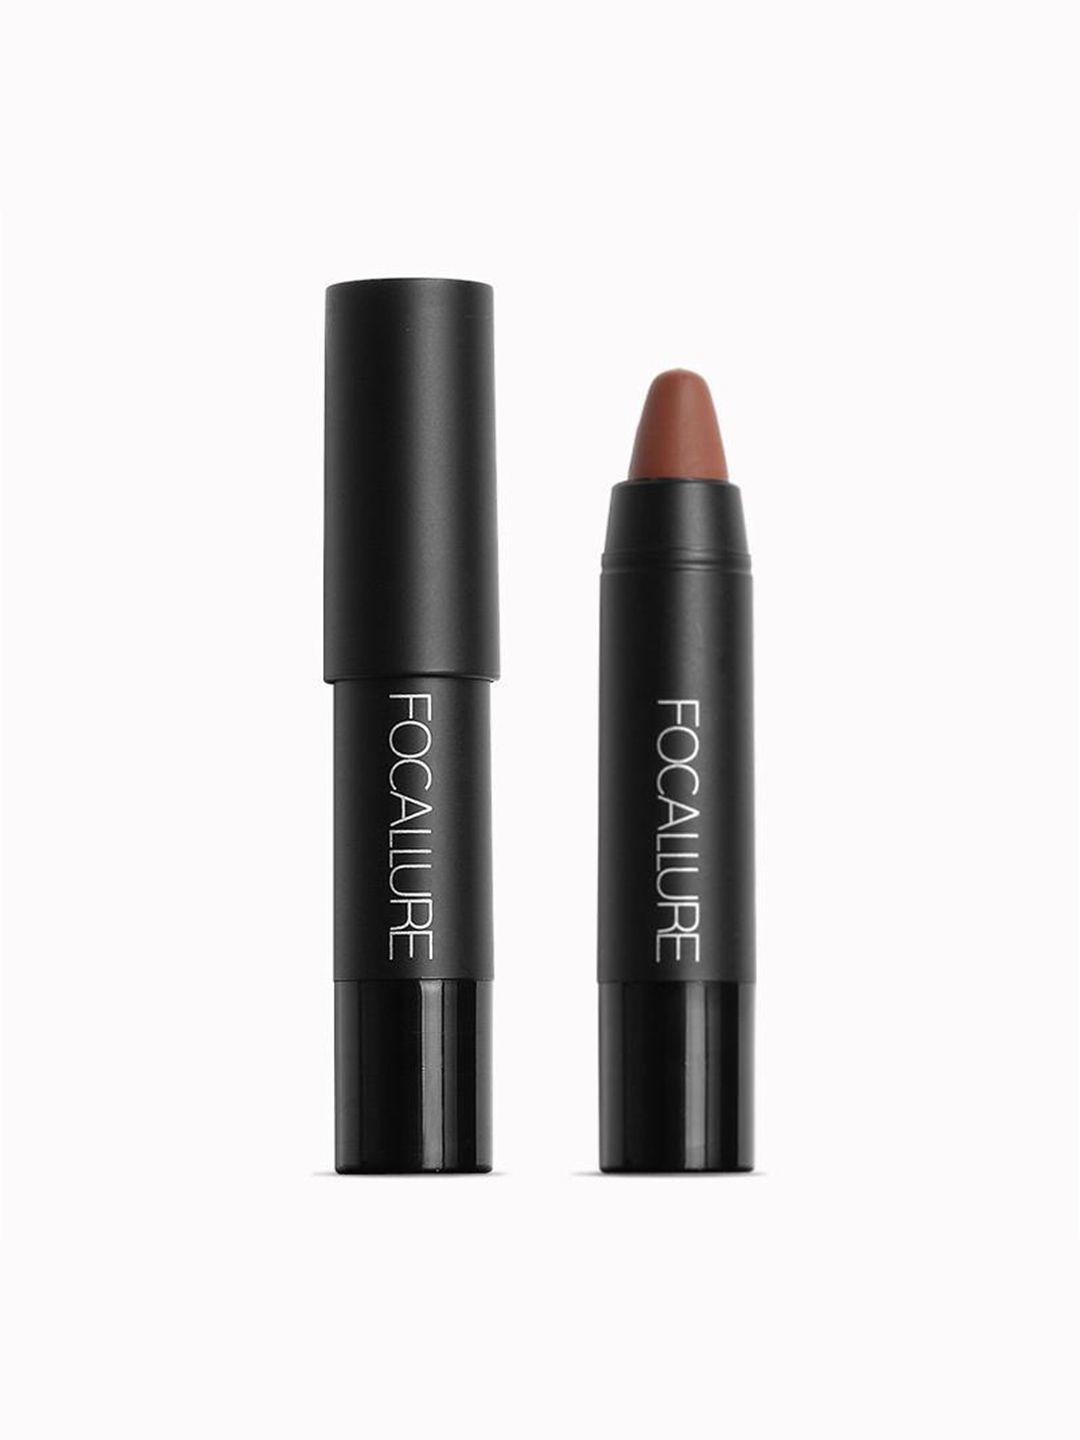 focallure matte lips crayon enriched with vitamin e 6 g - rose taupe 9